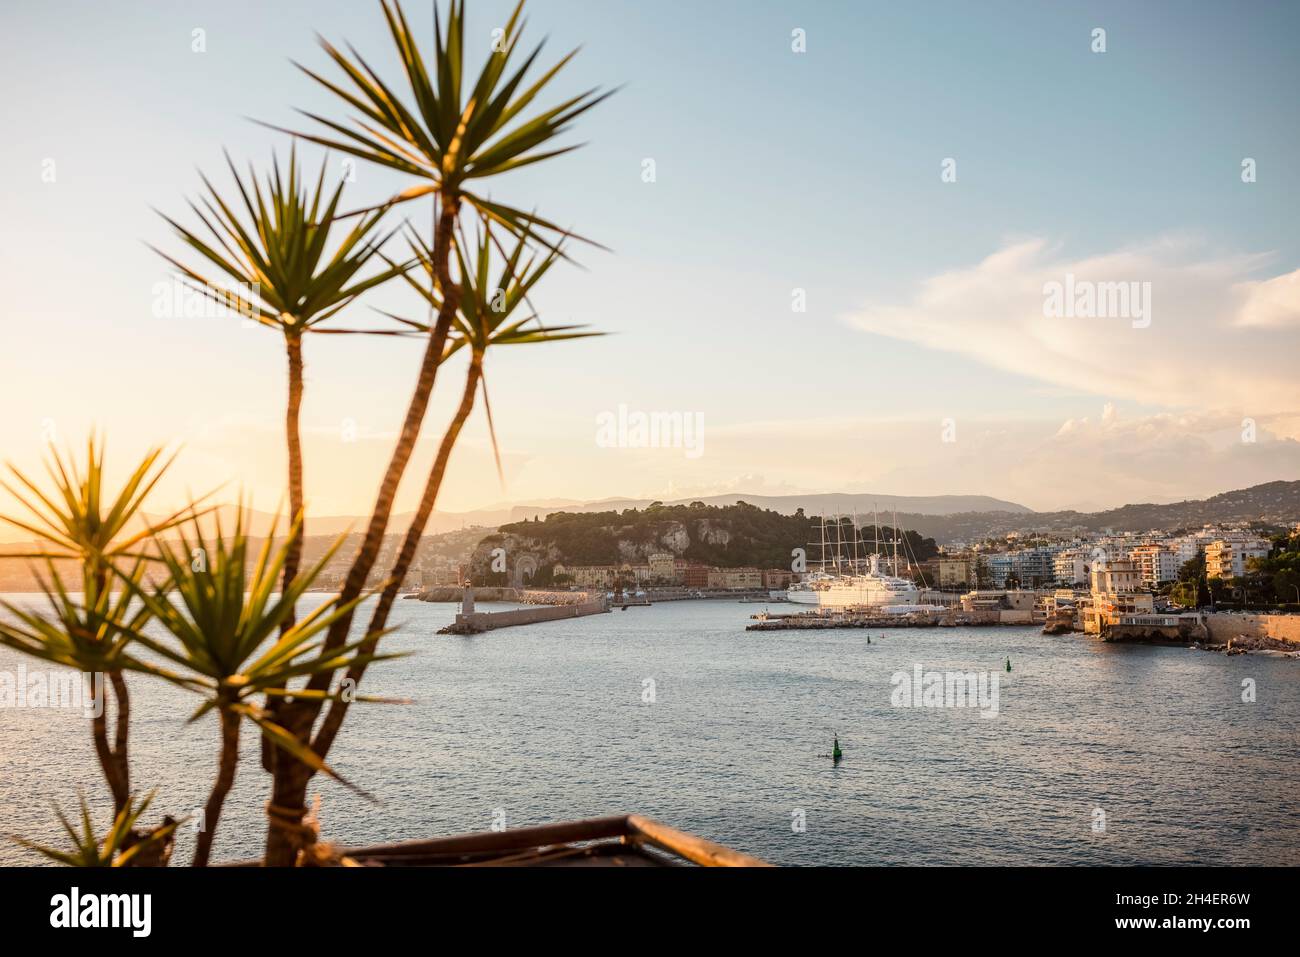 Panoramic view of the cliffs near the harbor of Nice, France. Photo taken from the Mont Boron side of the harbor, overlooking Le Plongeoir. Stock Photo